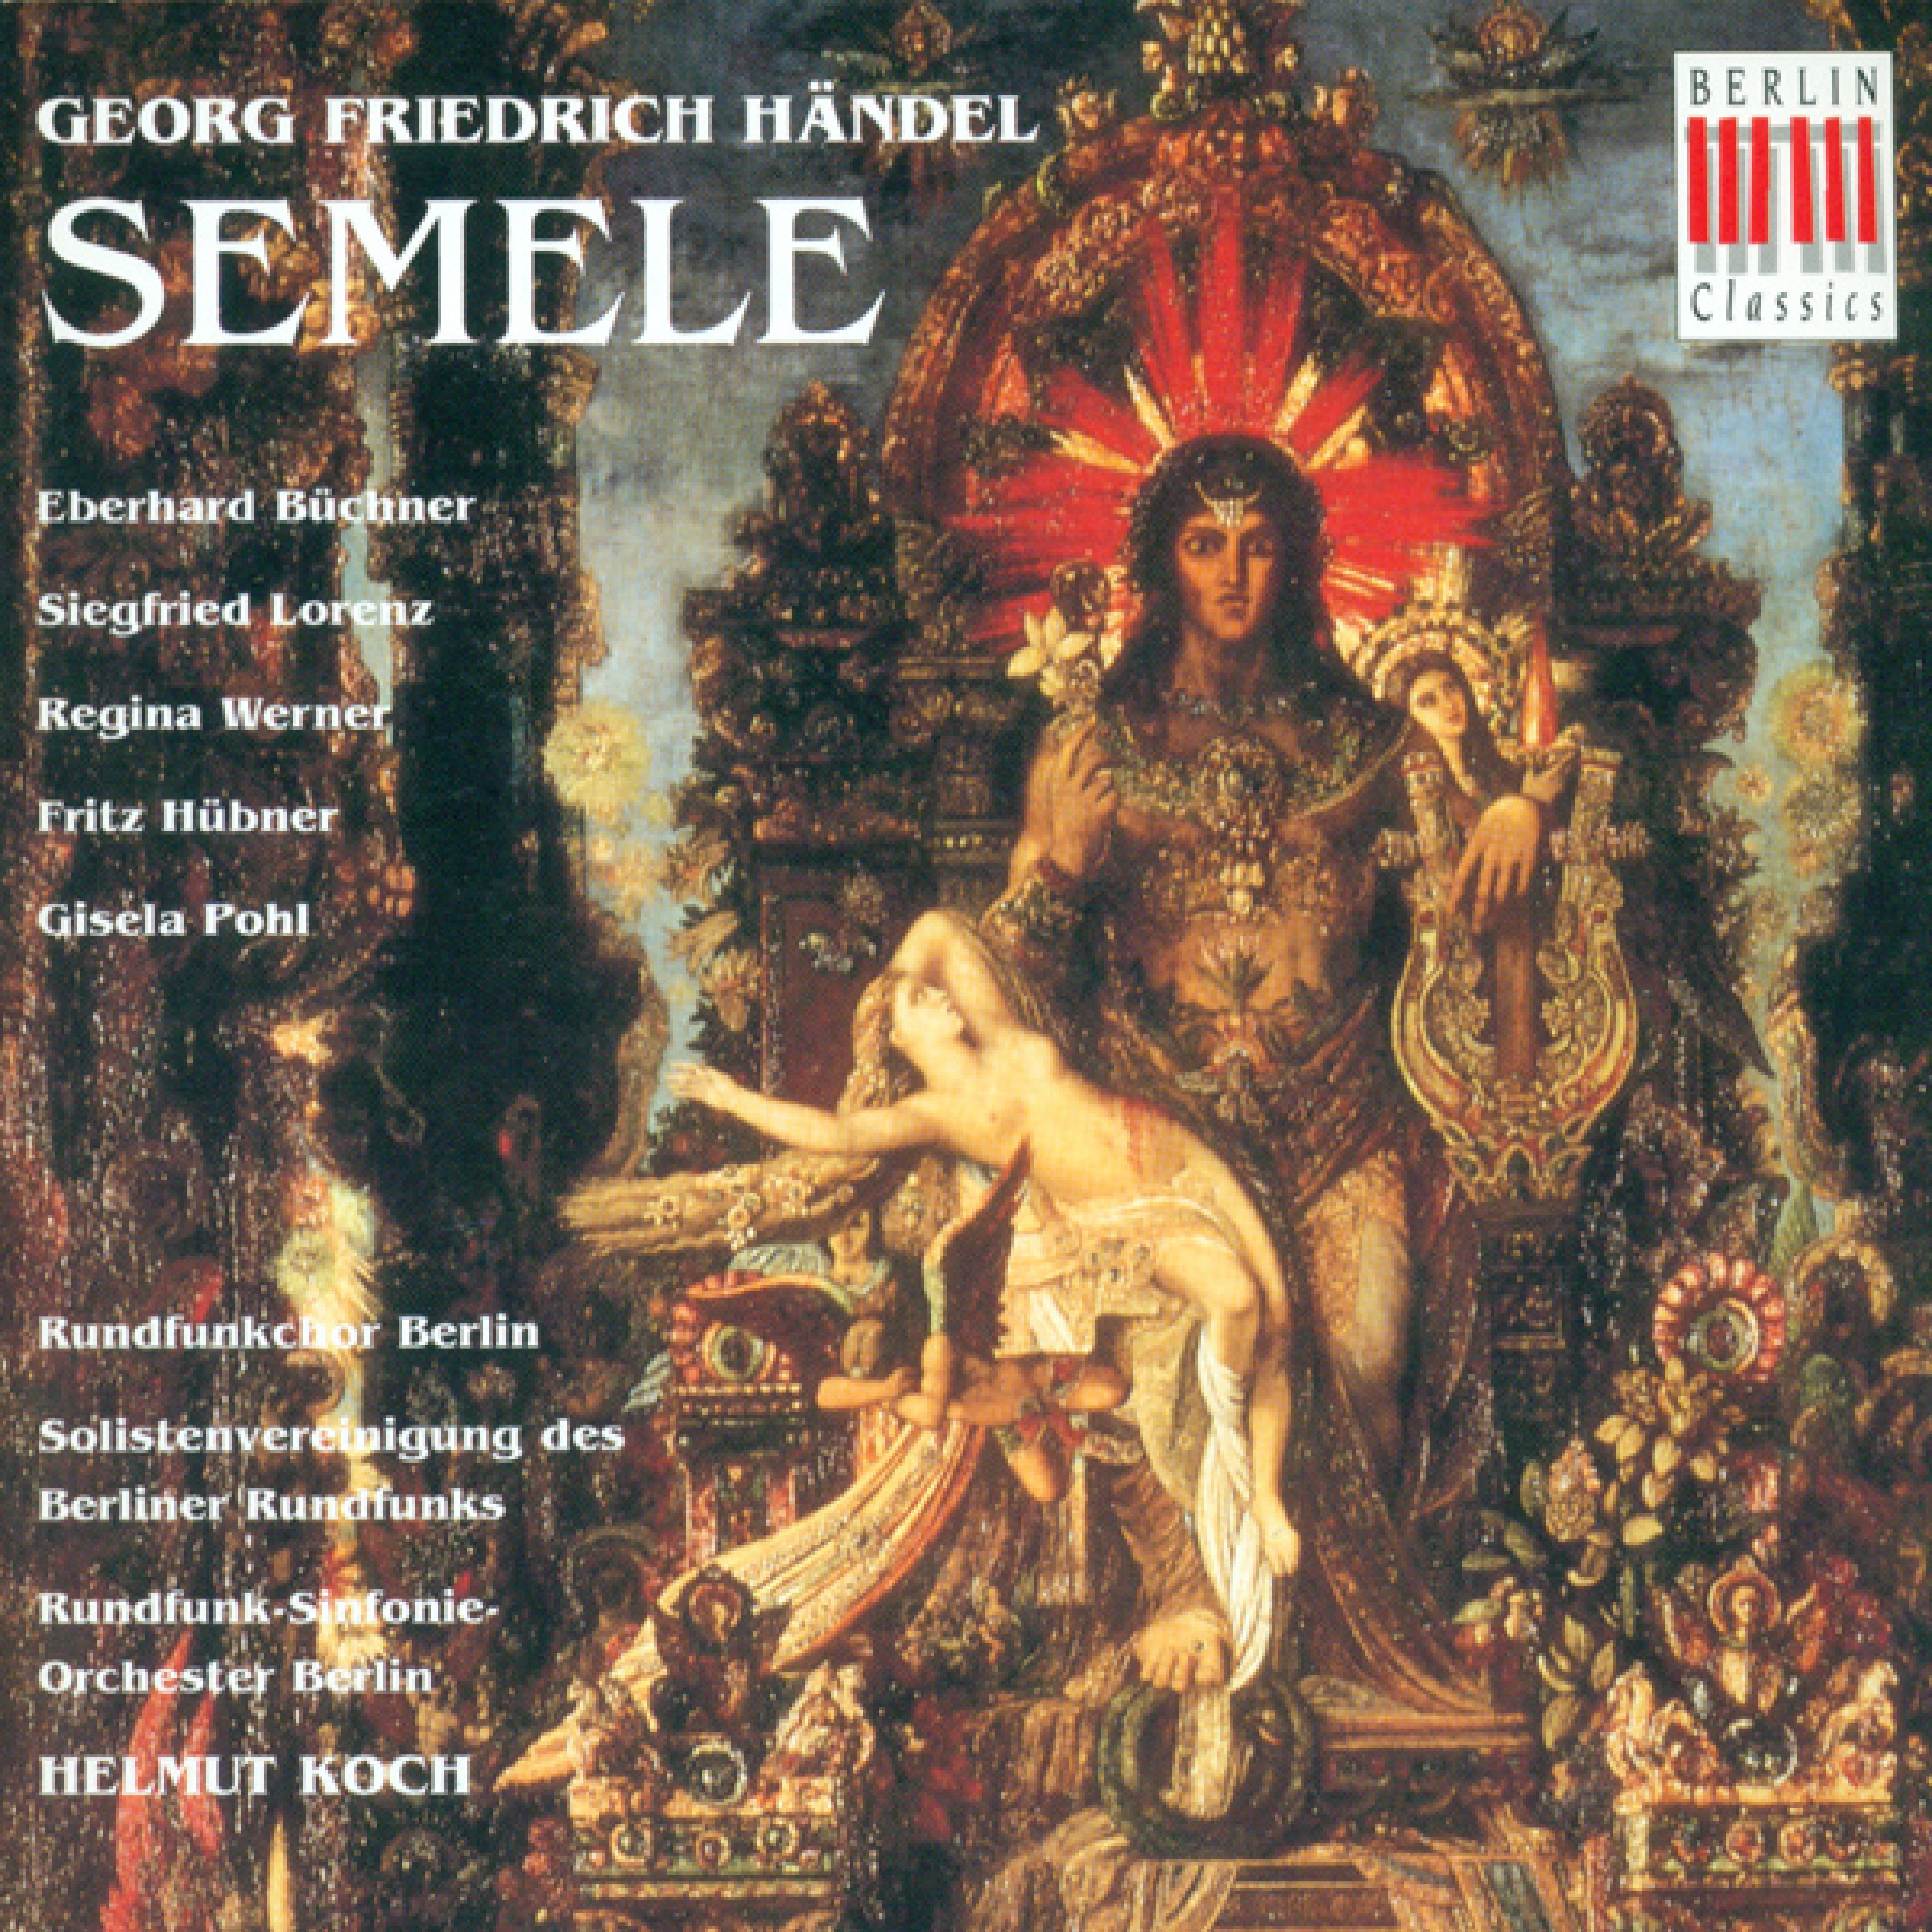 Semele, HWV 58: Act III - "Apollo comes, to relieve your care"